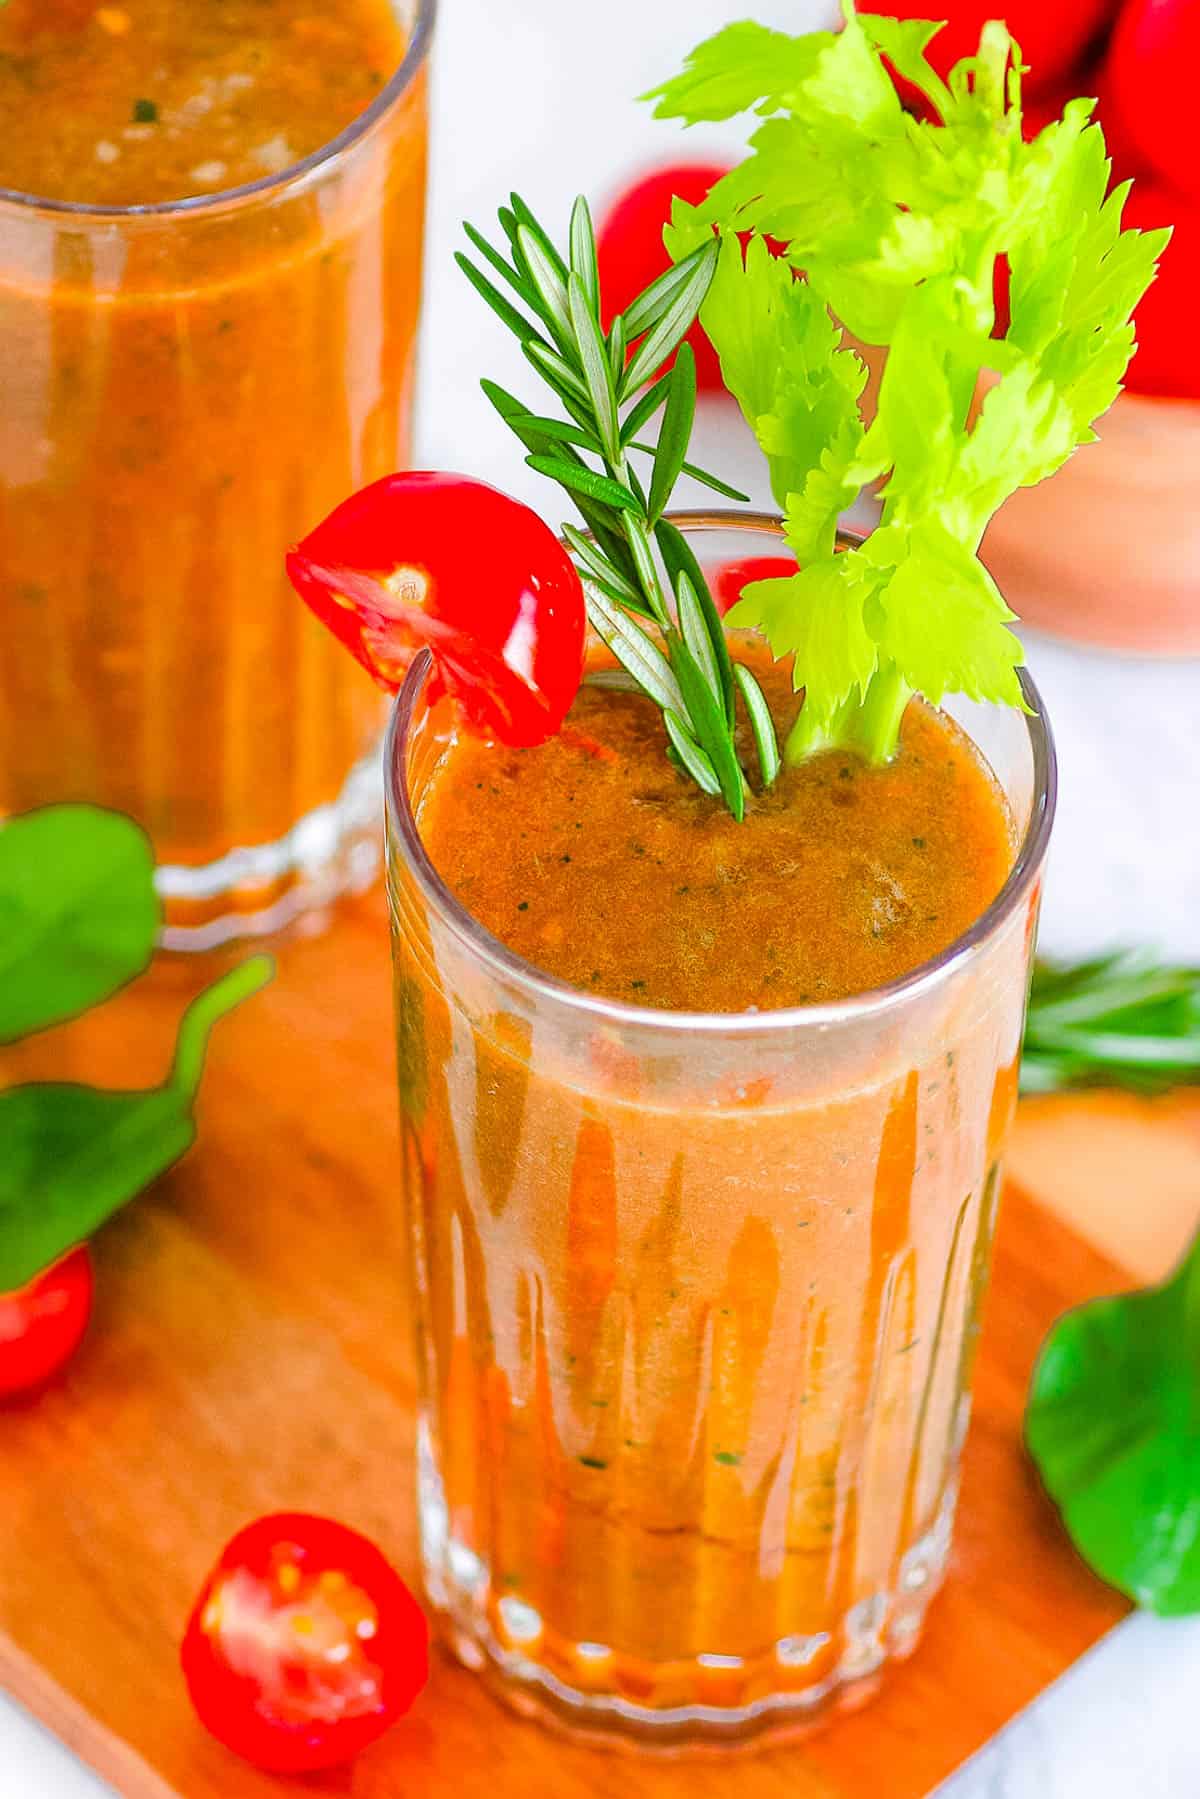 Savory tomato smoothie in a glass garnished with celery and cherry tomatoes.